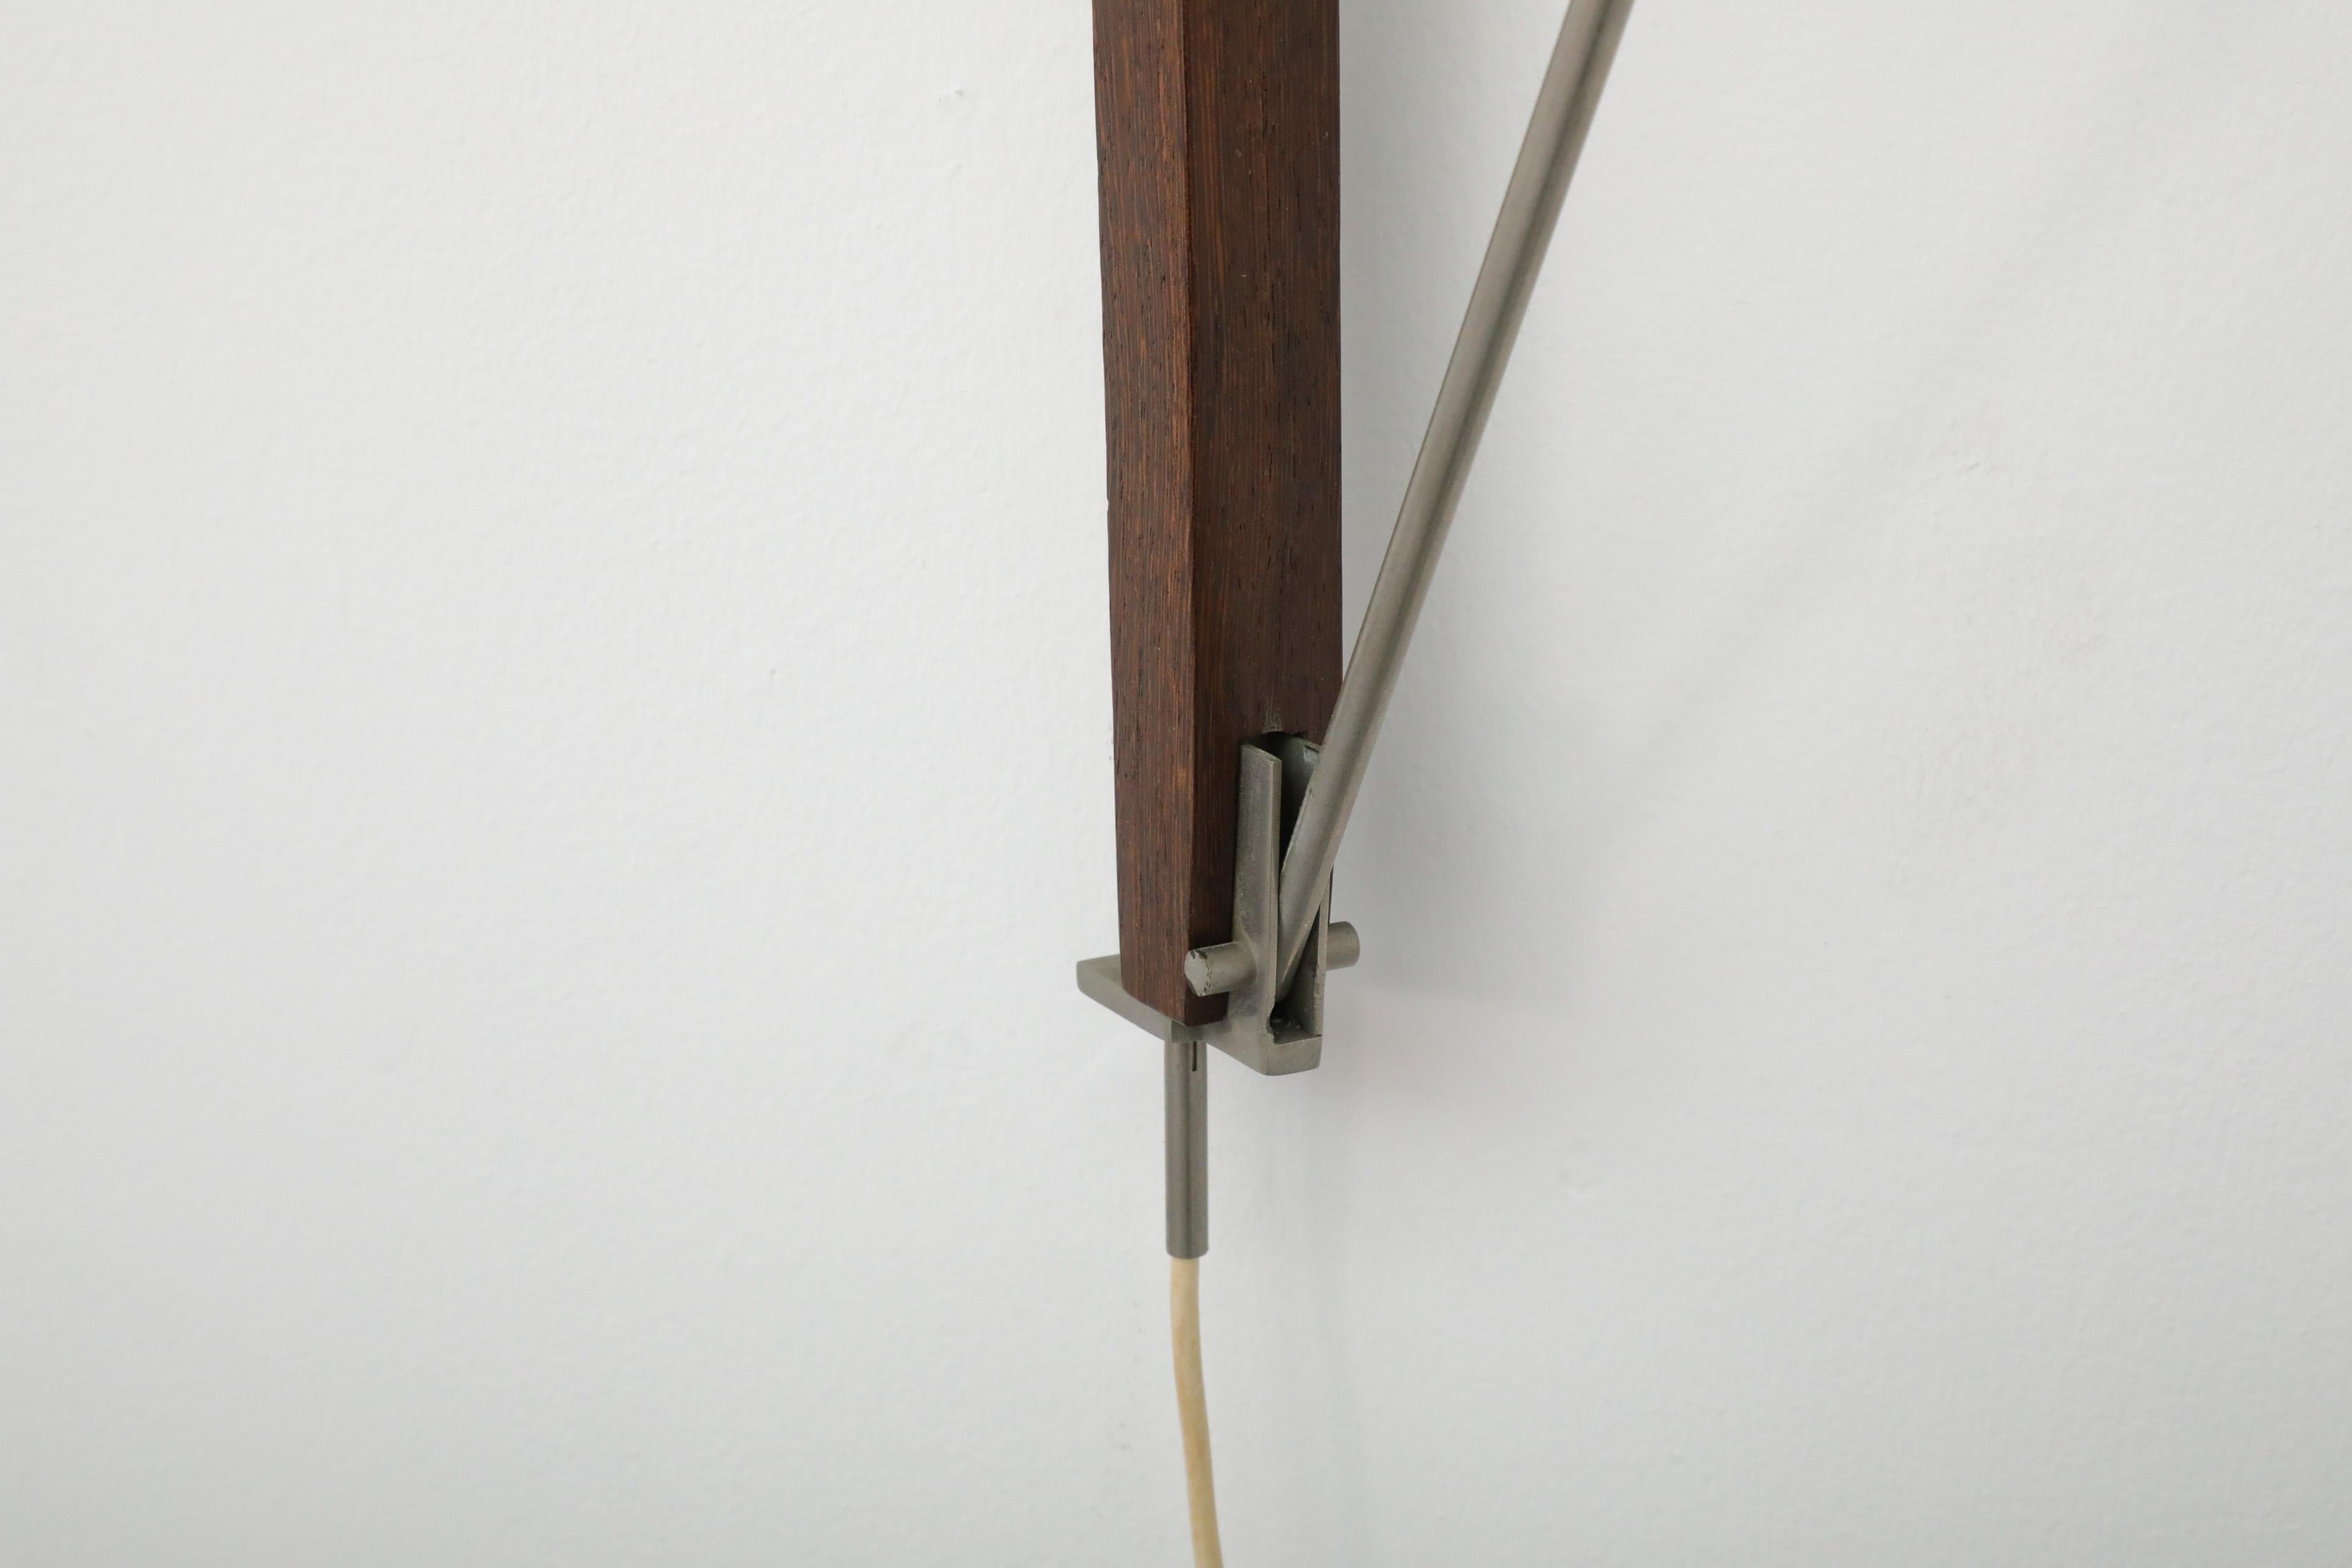 Rare Willem Hagoort Wall Sconce w/ White Enameled Metal Cone Shade & Teak Mount For Sale 10